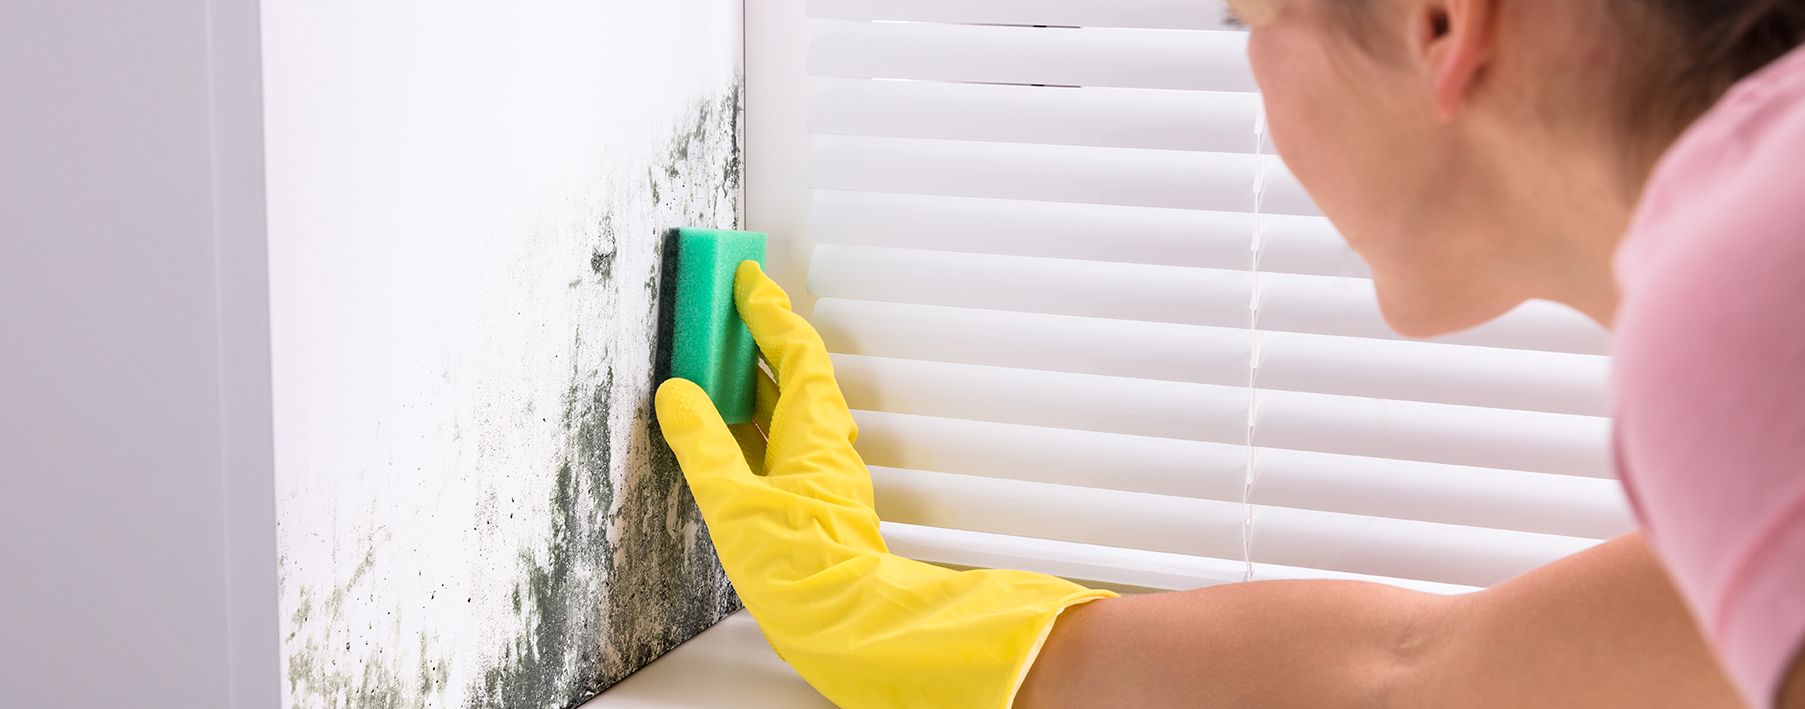 A woman wearing a rubber glove scrubbing mold off a wall with a sponge.